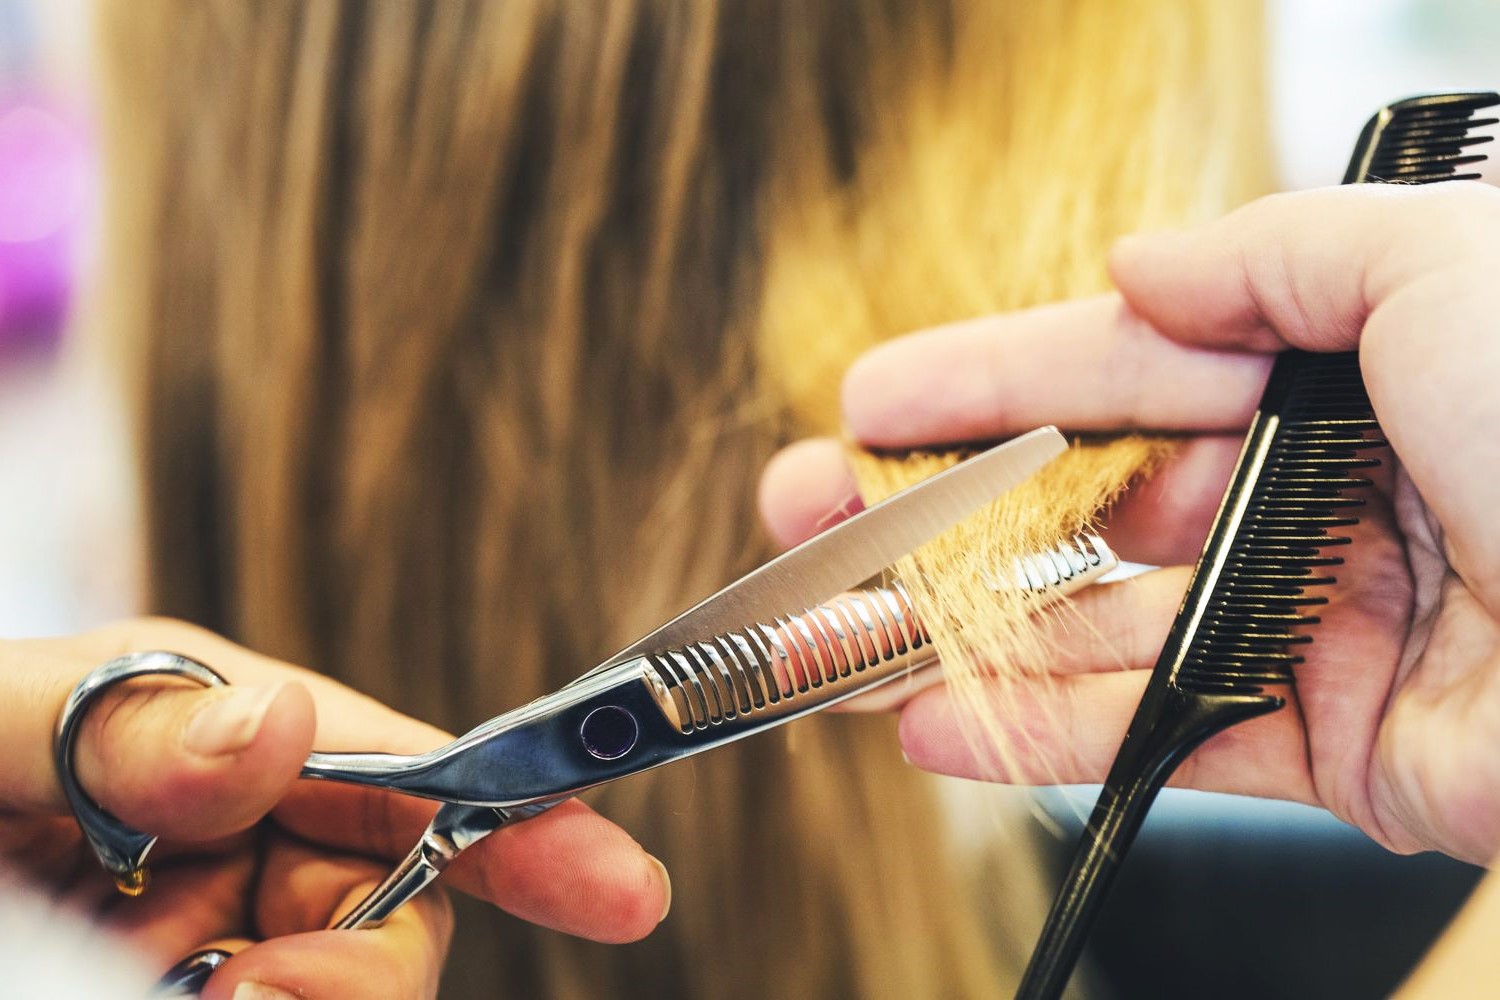 How To Use Thinning Shears